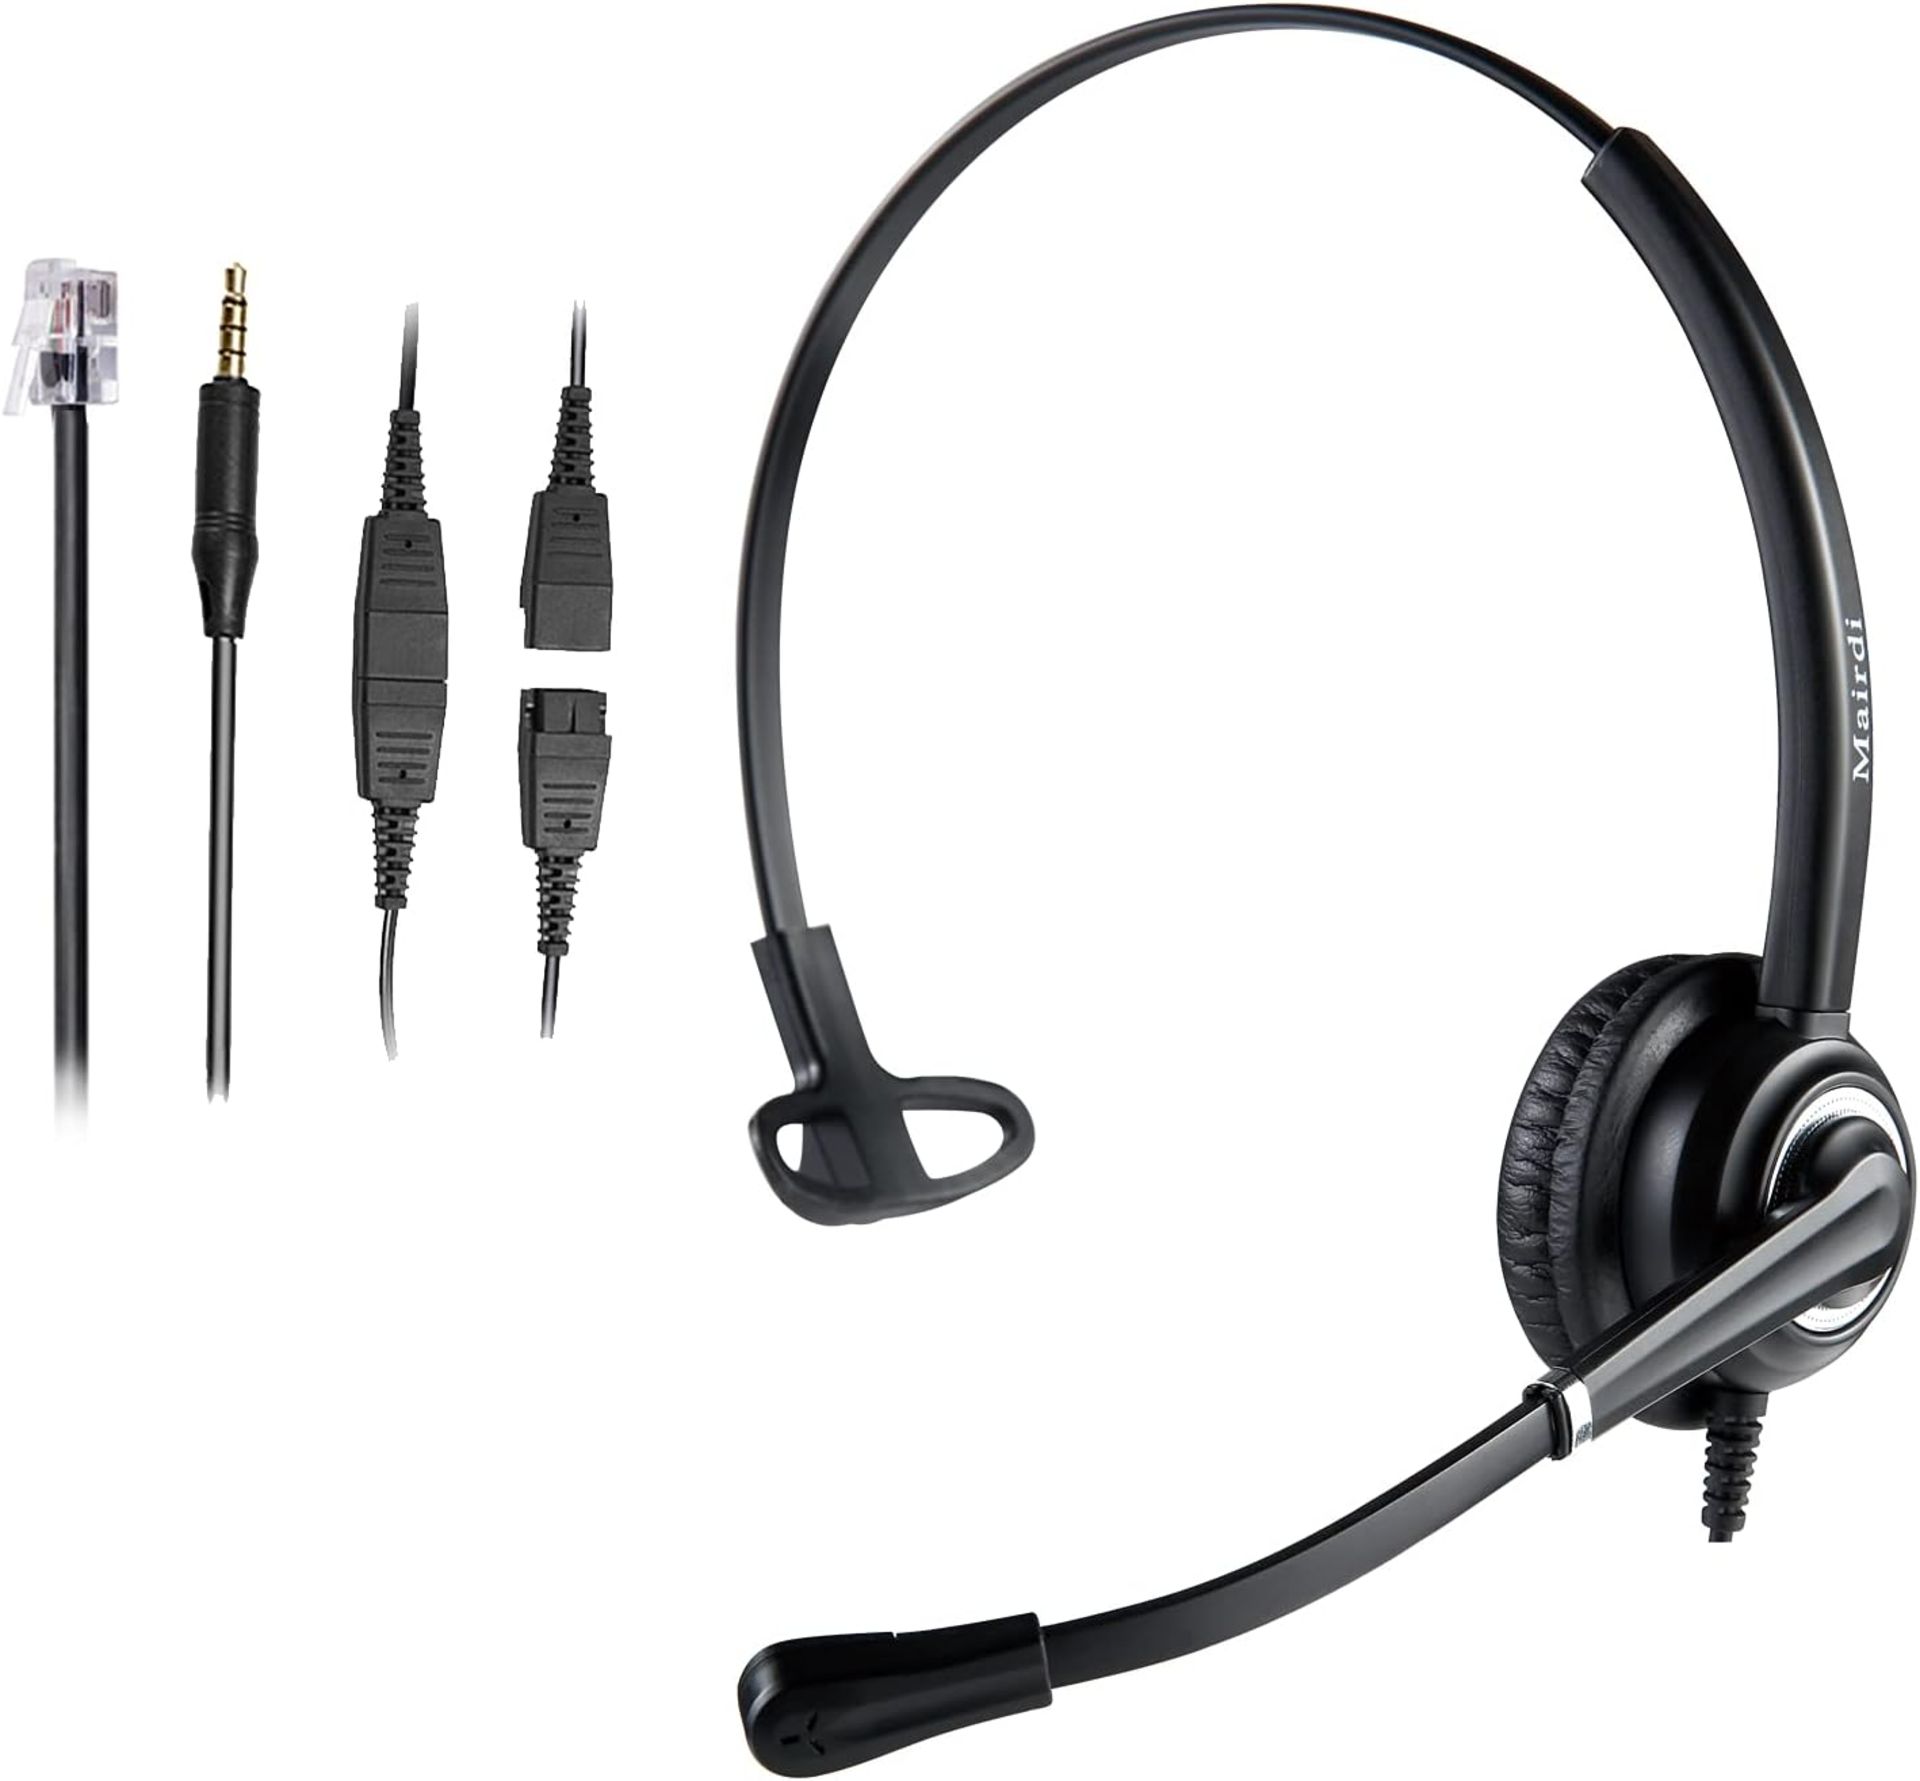 RRP £150 Set of 5 x MAIRDI Telephone Headset with RJ9 Jack & 3.5mm Connector for Landline